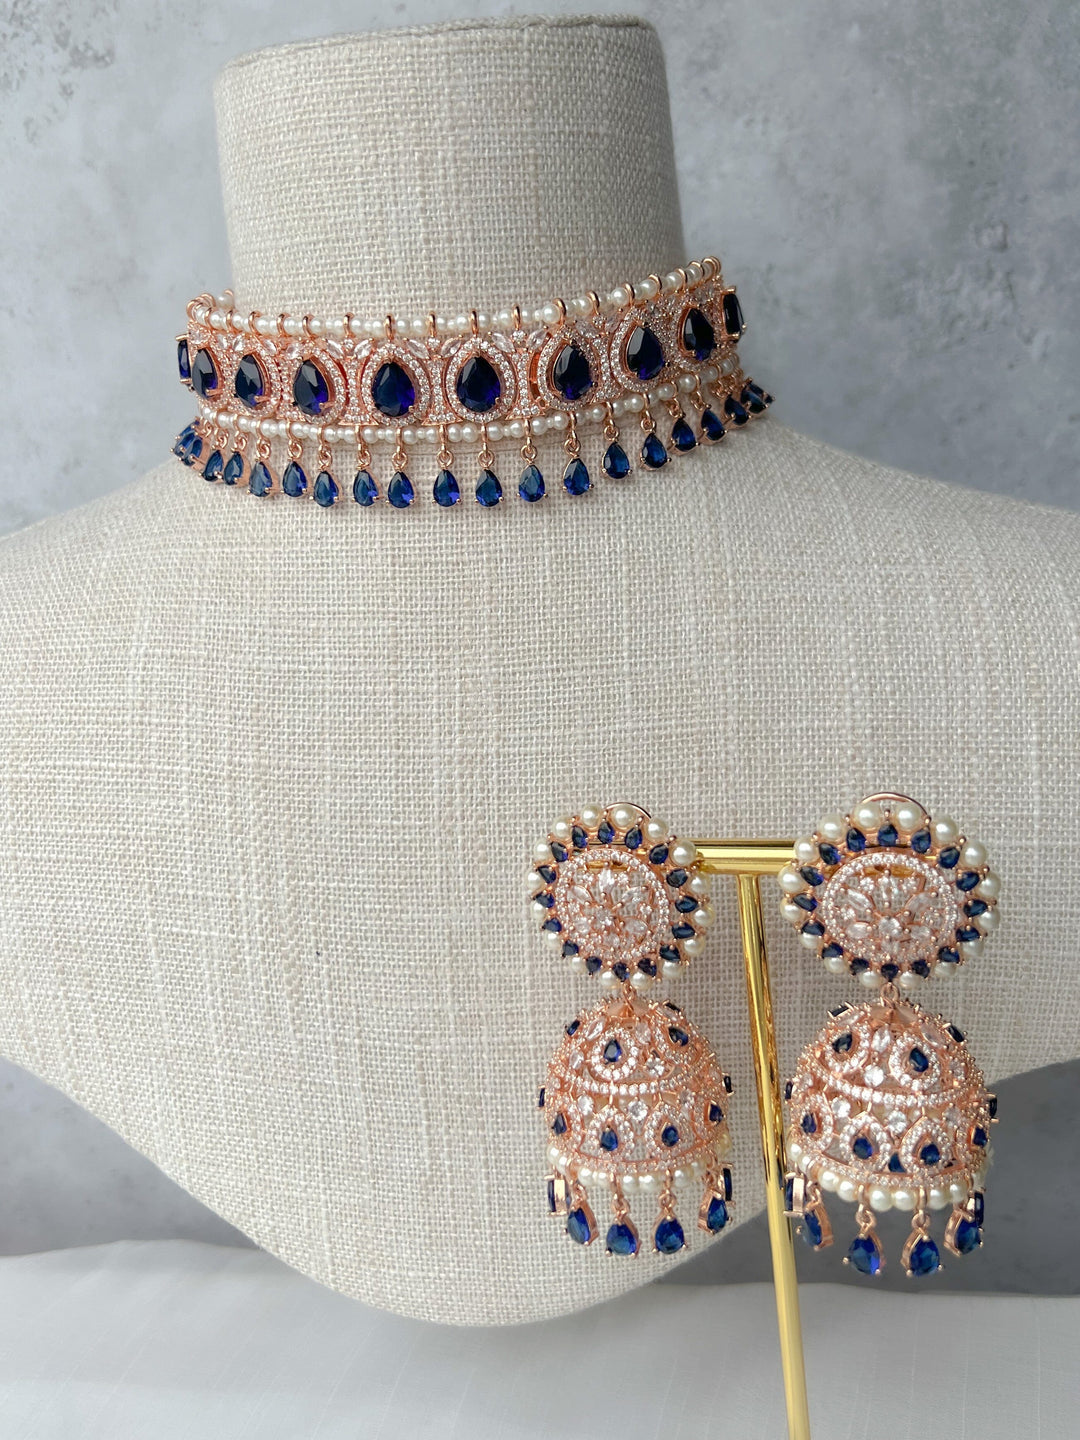 A Teardrop Stone in Rose Gold & Sapphire Necklace Sets THE KUNDAN SHOP 